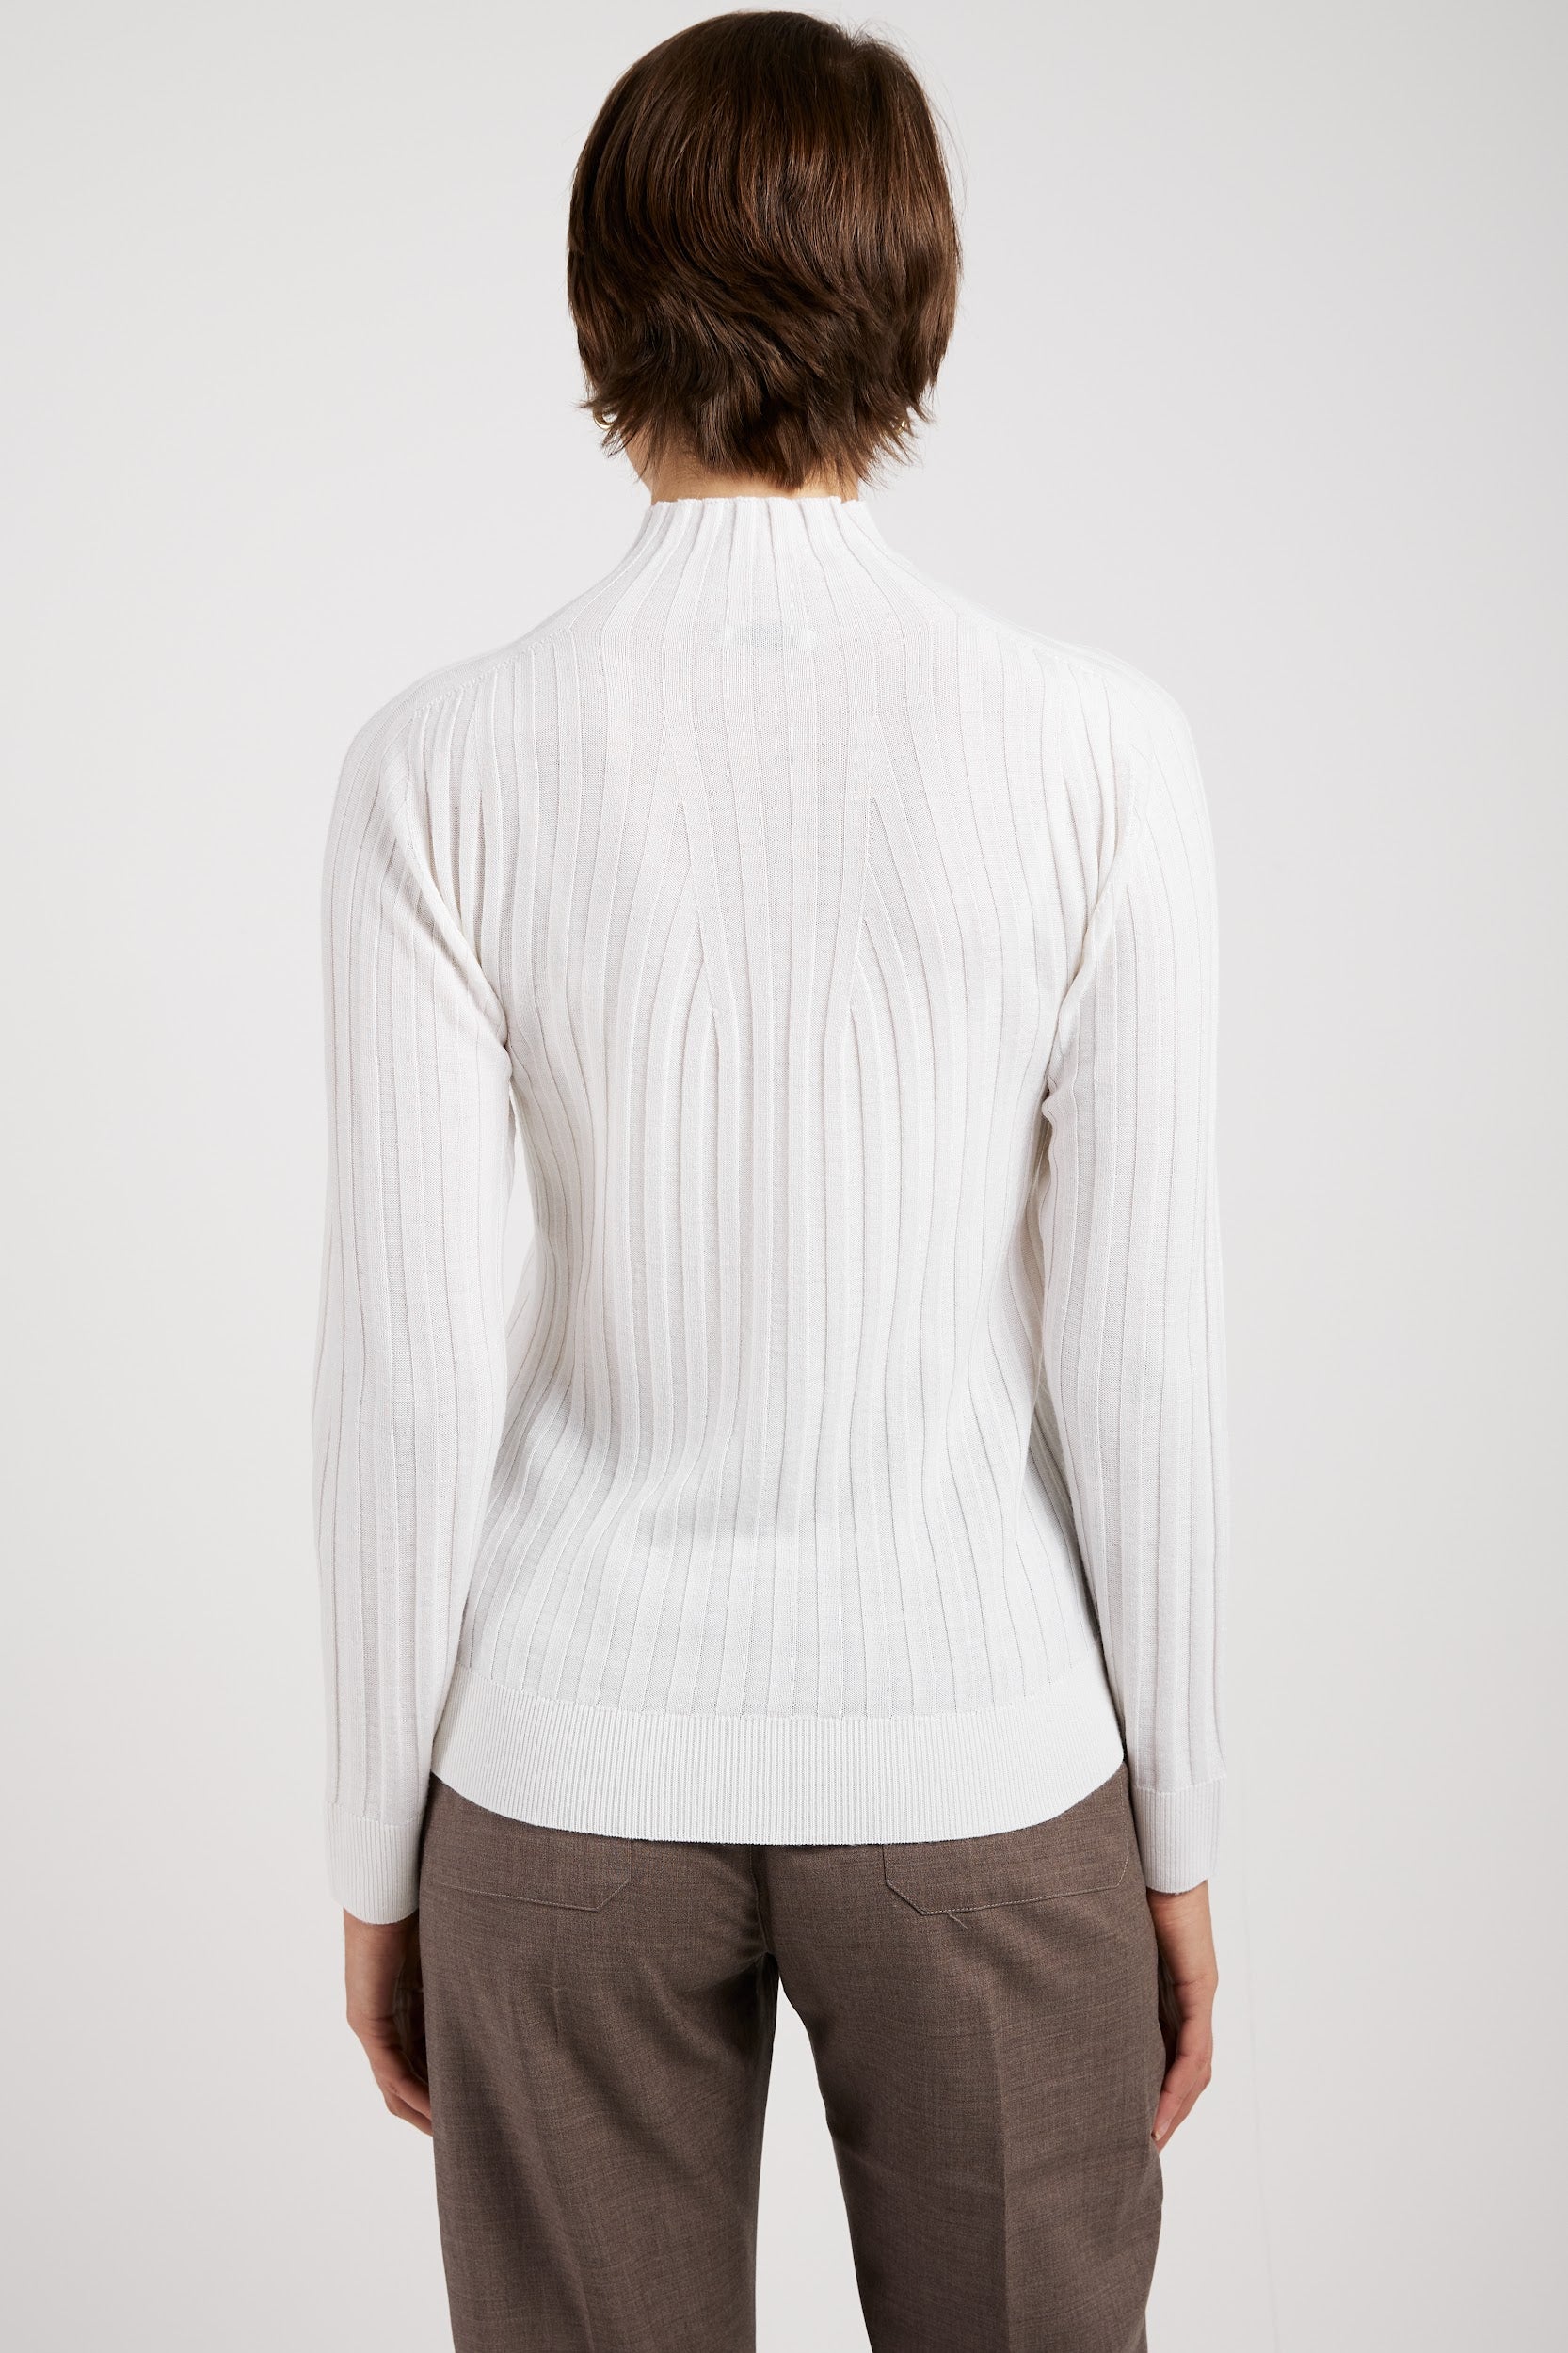 PESERICO Tricot Mock Neck Sweater in Bright White